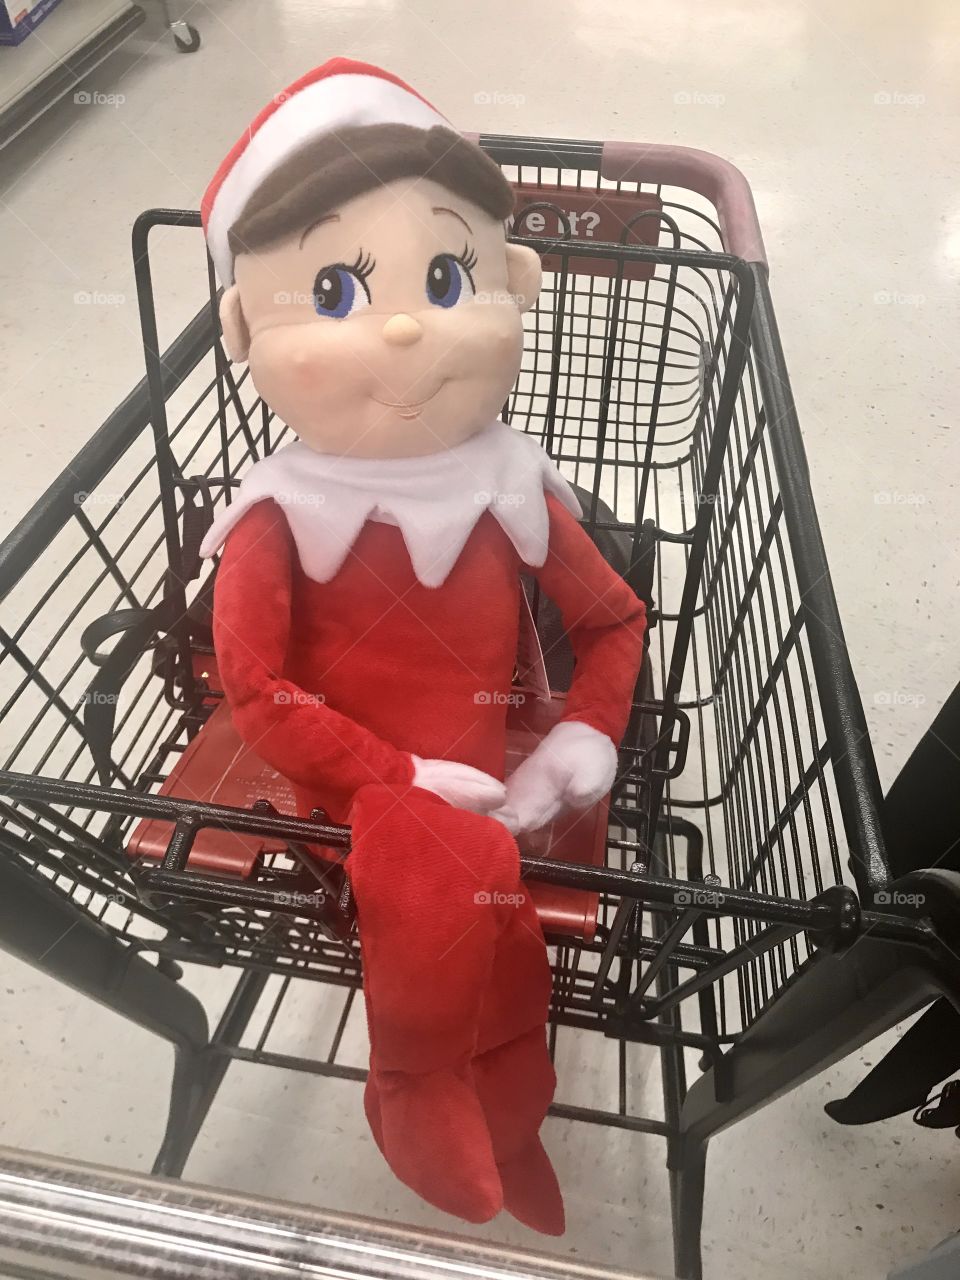 A big mischievous elf on the shelf doll wearing s red and white Christmas suit sitting in the shopping cart at the department store. USA, America 